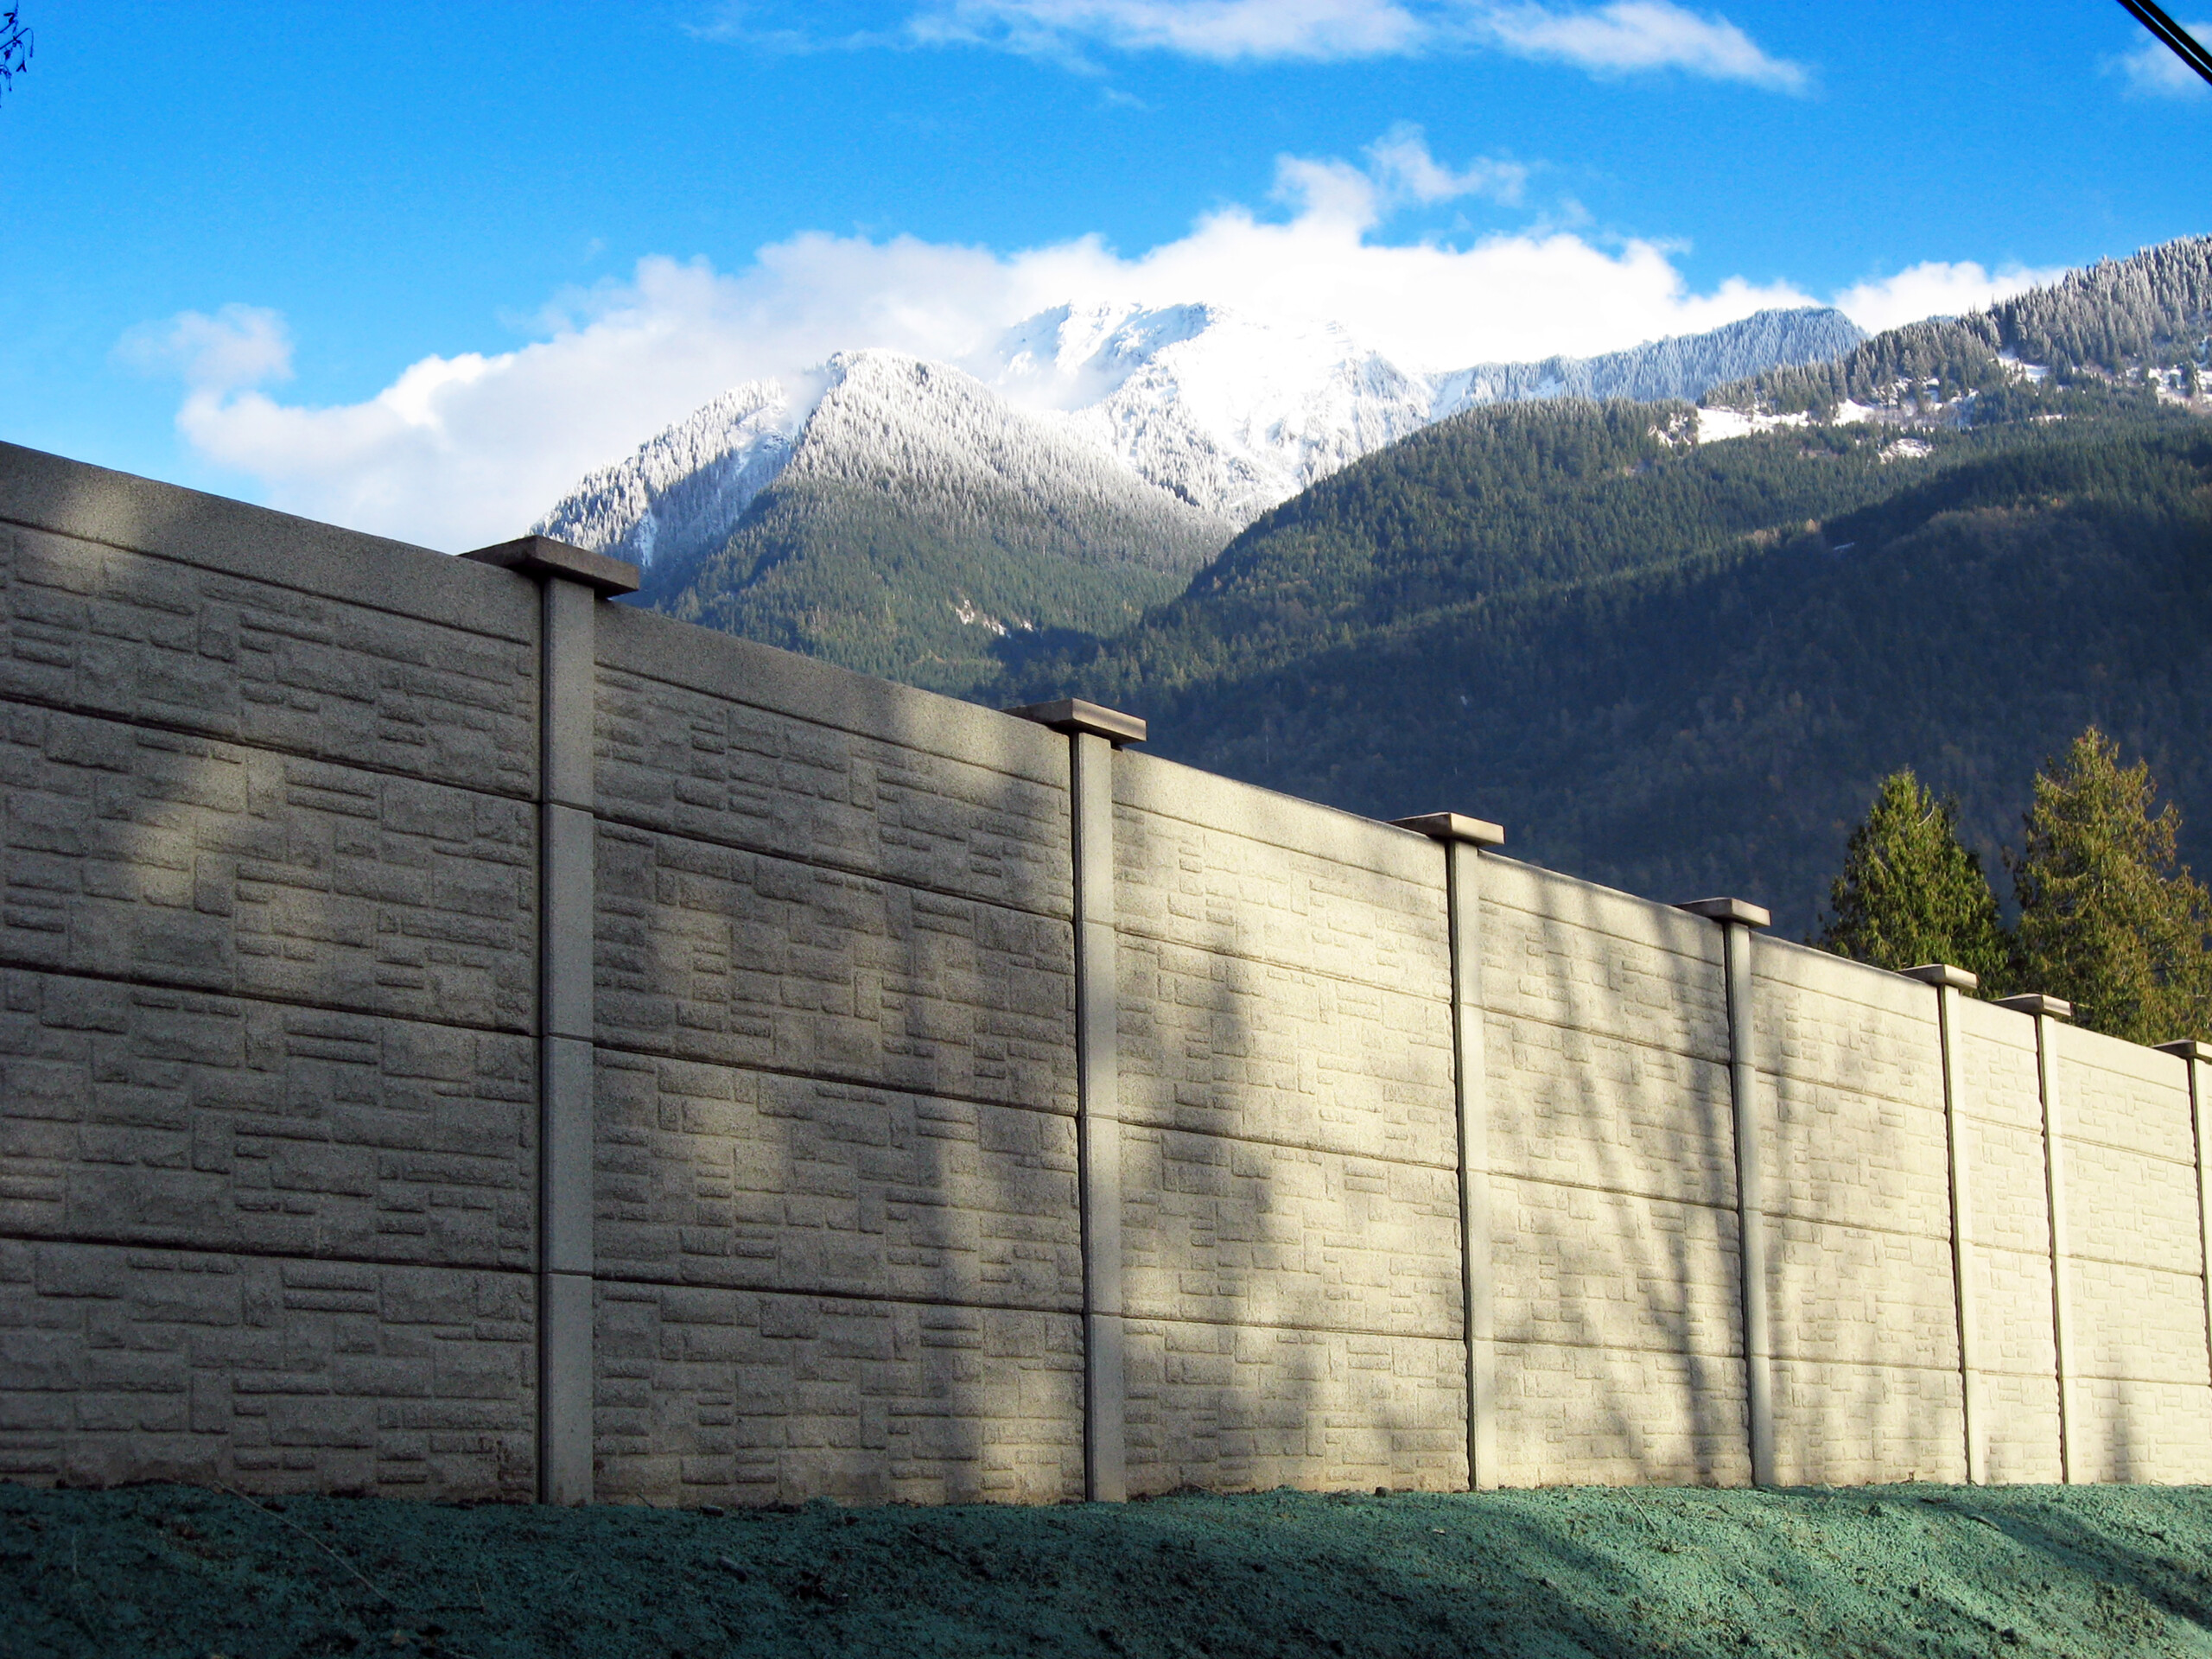 A precast noise barrier along Highway 9 in Agassiz, BC.